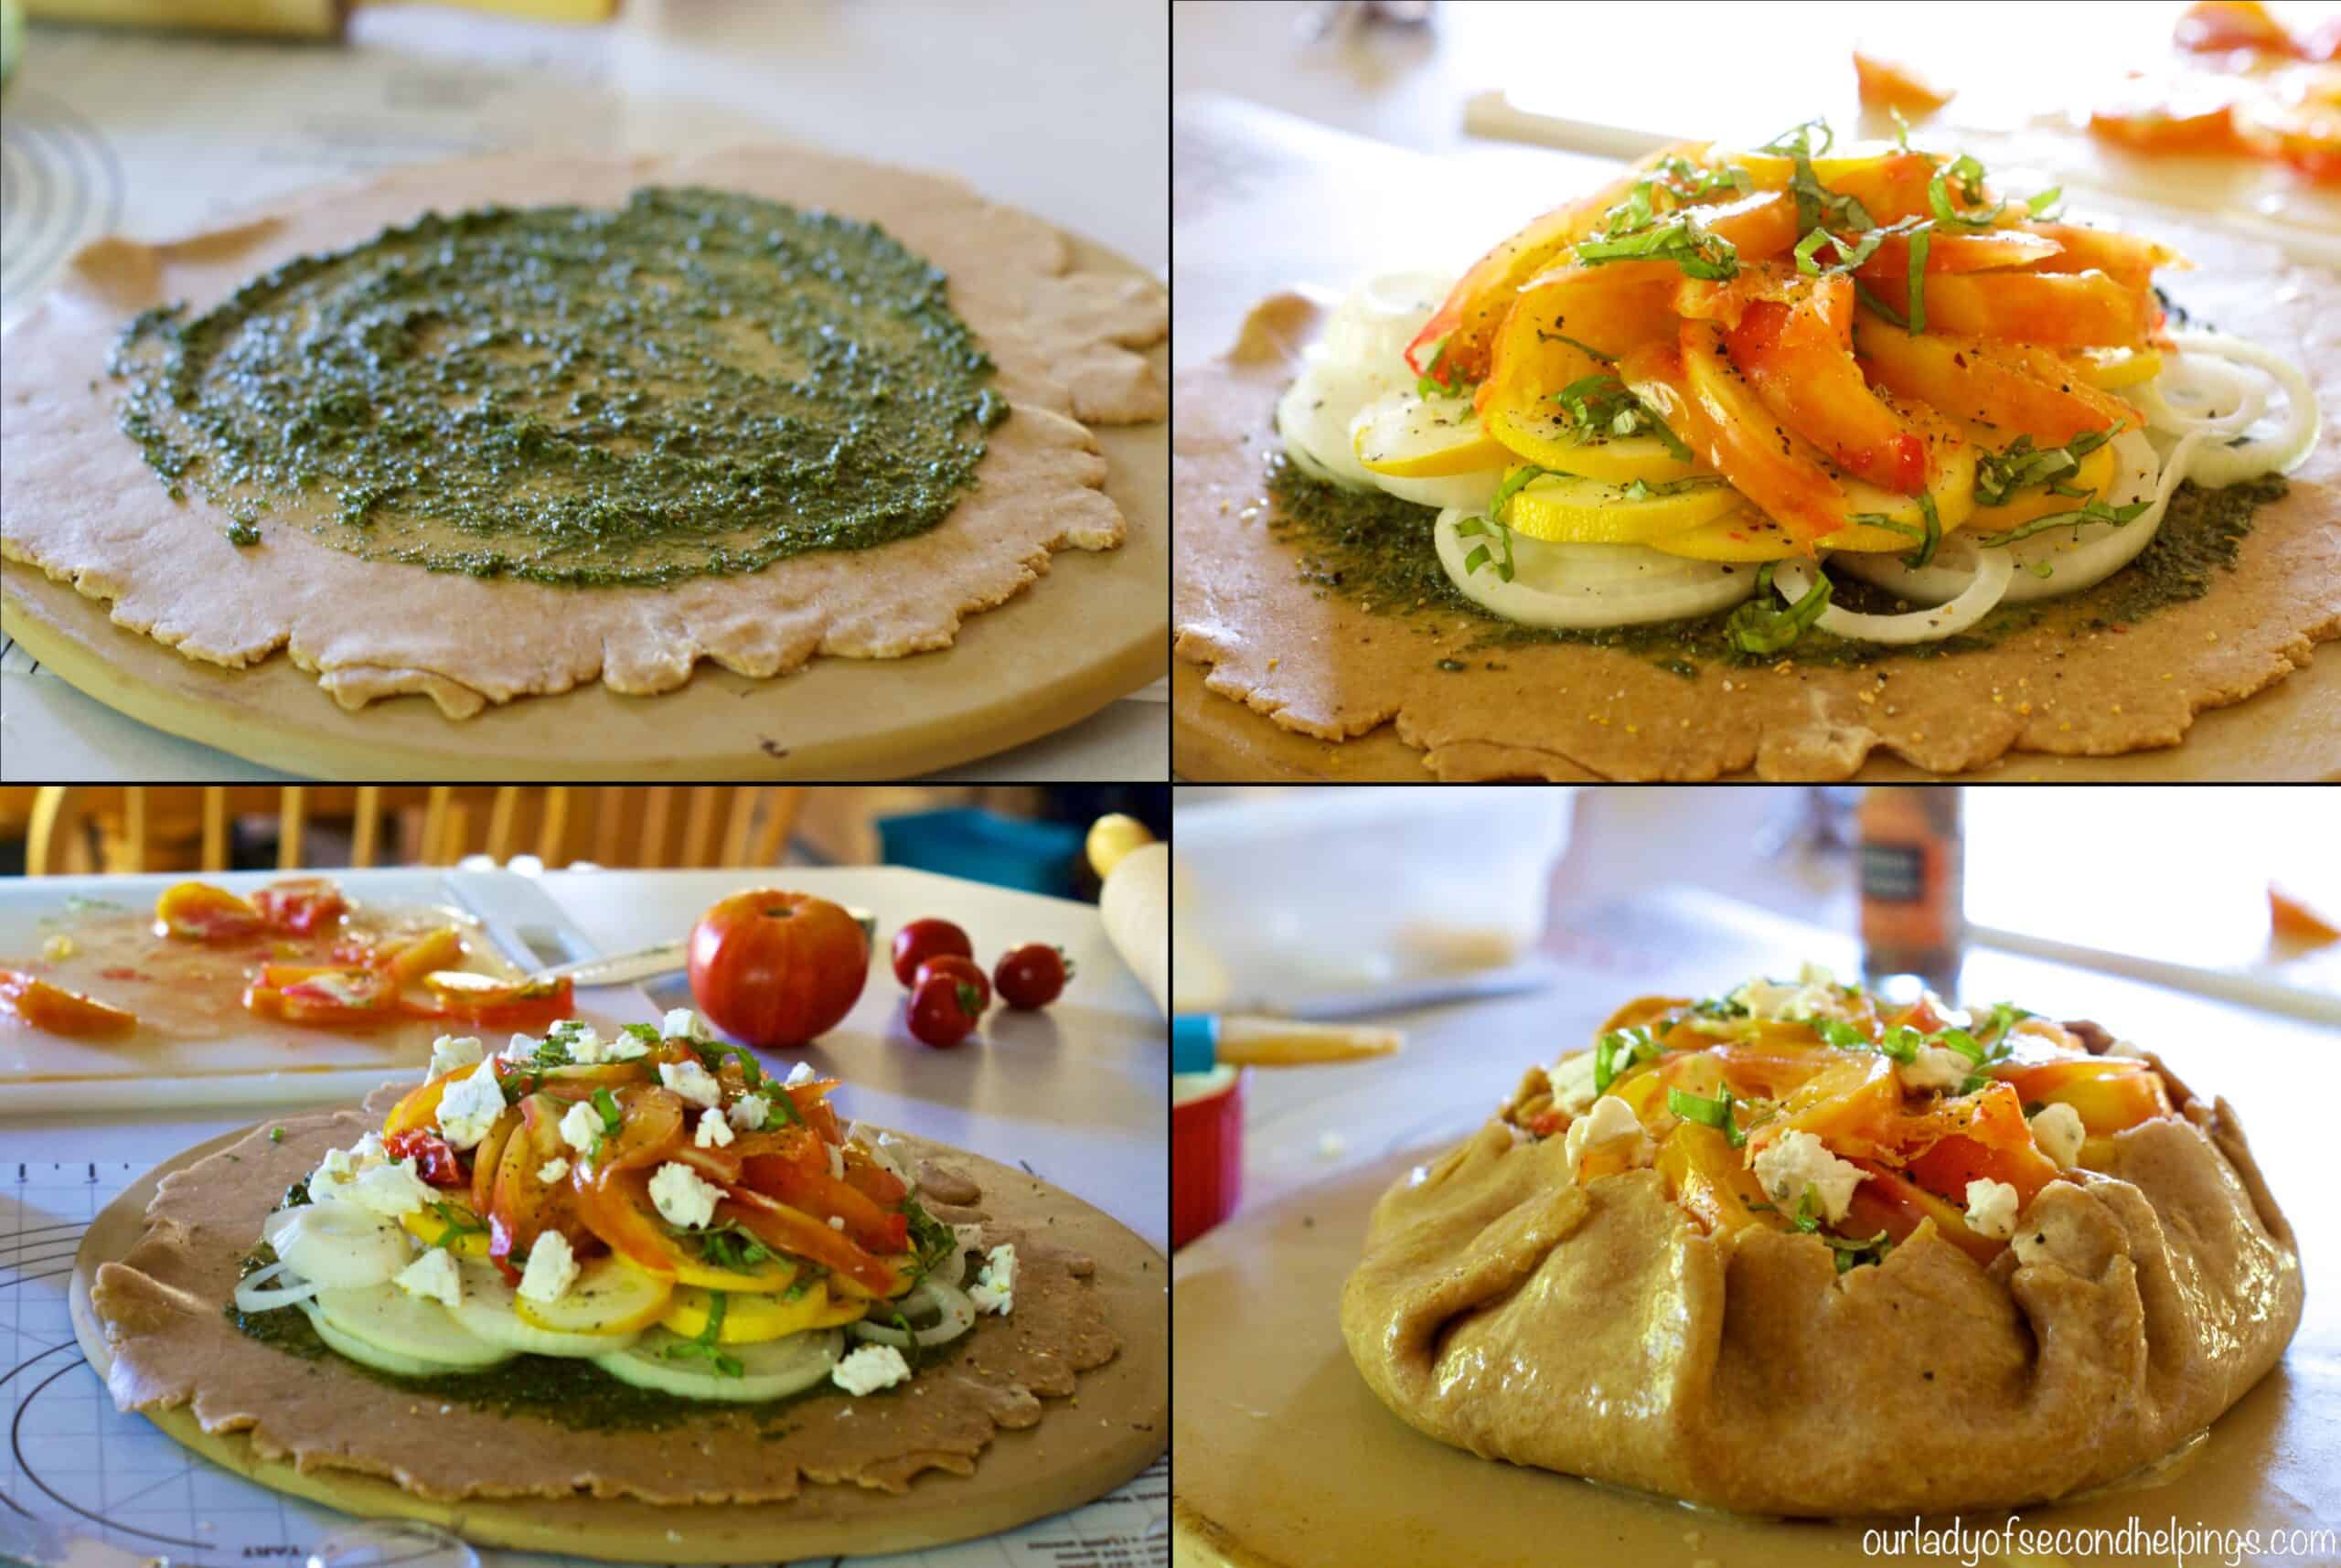 Assembling a Tomato & Sweet Onion Galette | Our Lady of Second Helpings